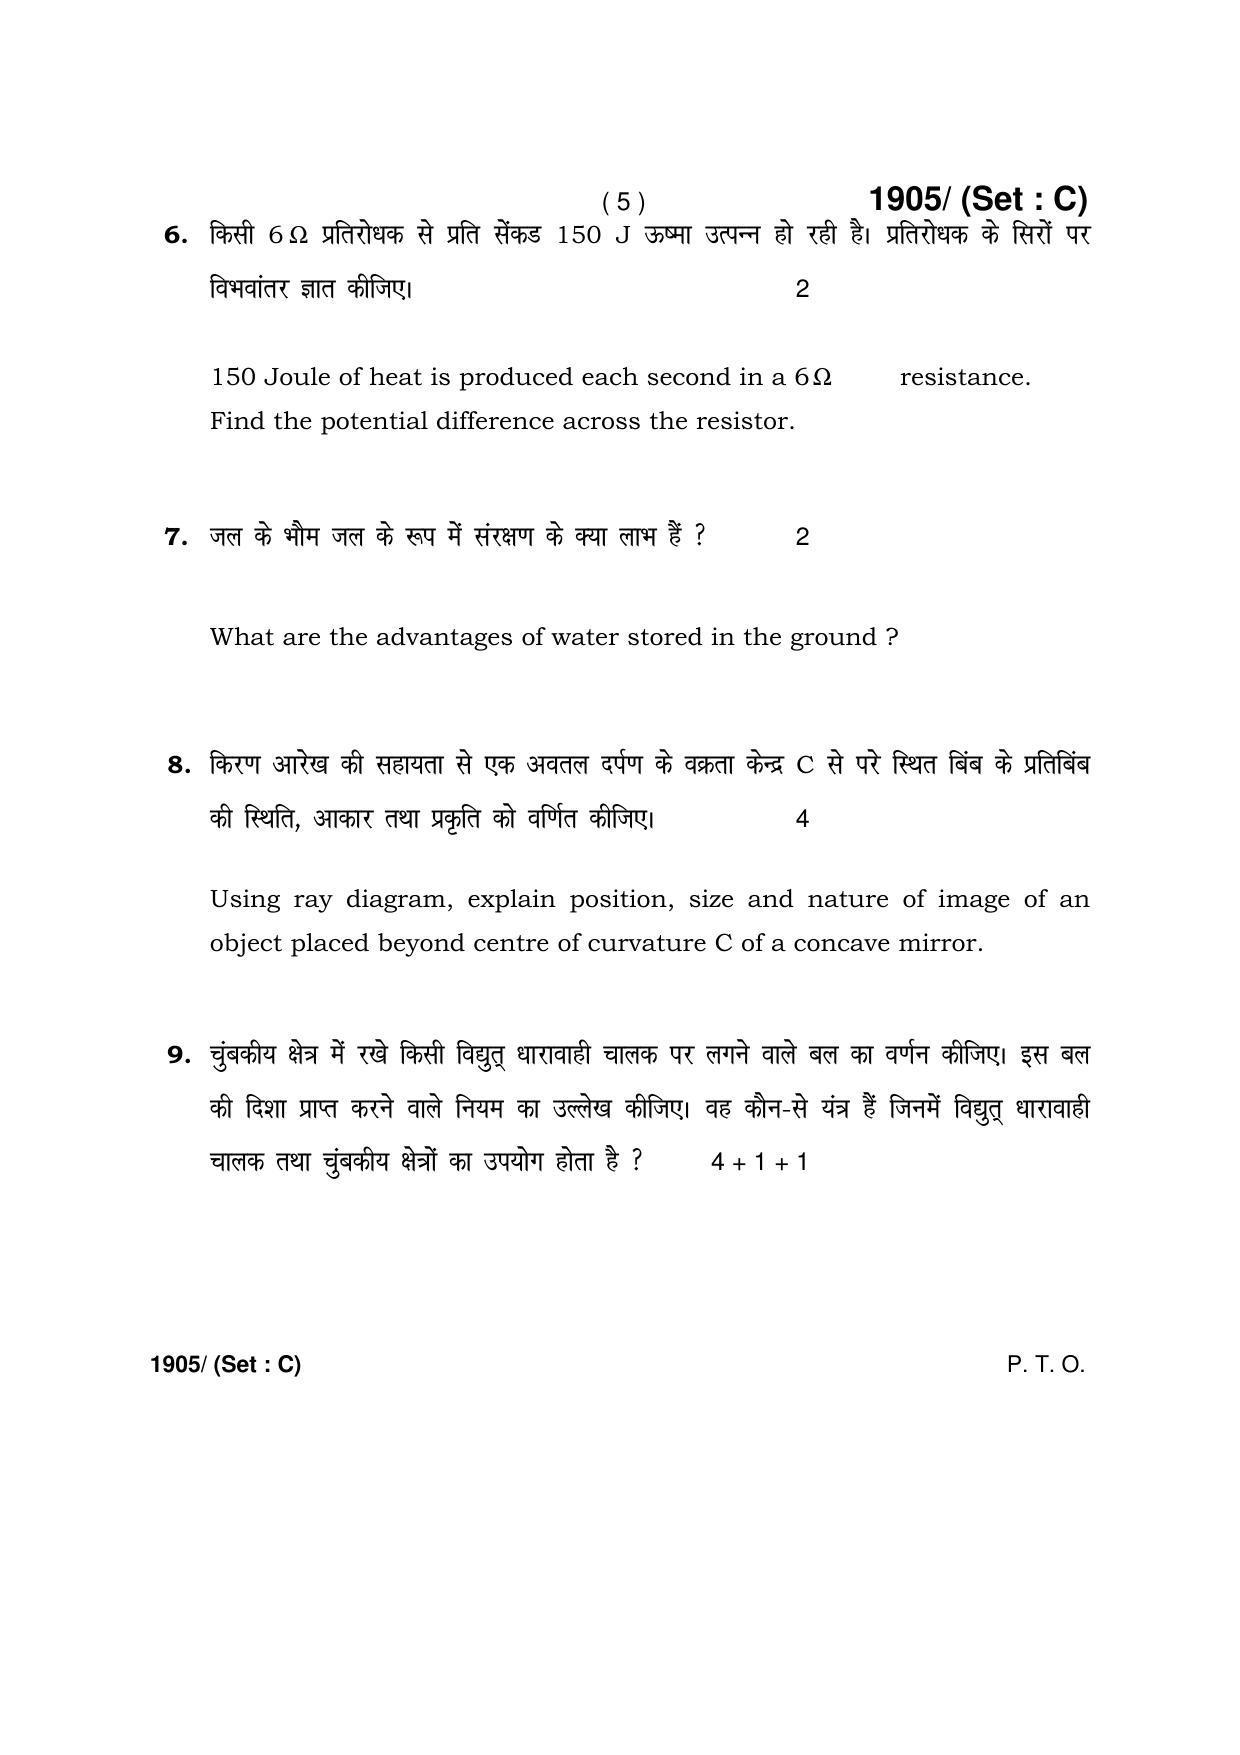 Haryana Board HBSE Class 10 Science -C 2017 Question Paper - Page 5